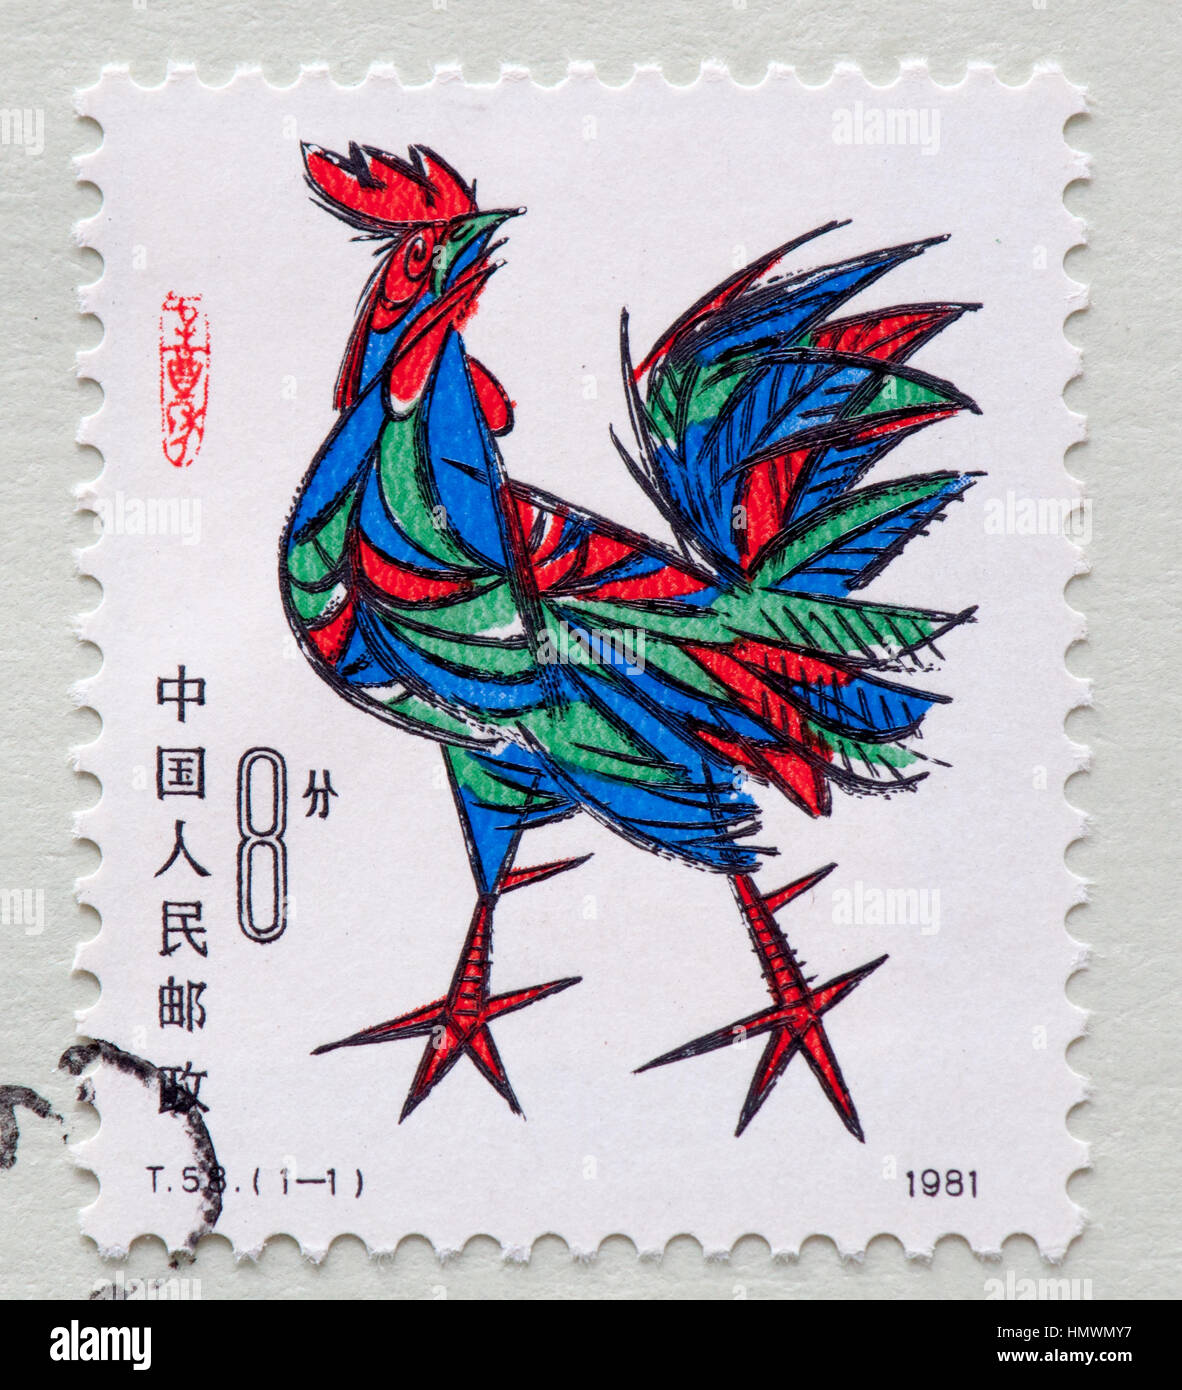 CHINA - CIRCA 1981: A stamps printed in China shows the 1st Chinese lunar year zodiac animals rooster Stamp, circa 1981. Stock Photo